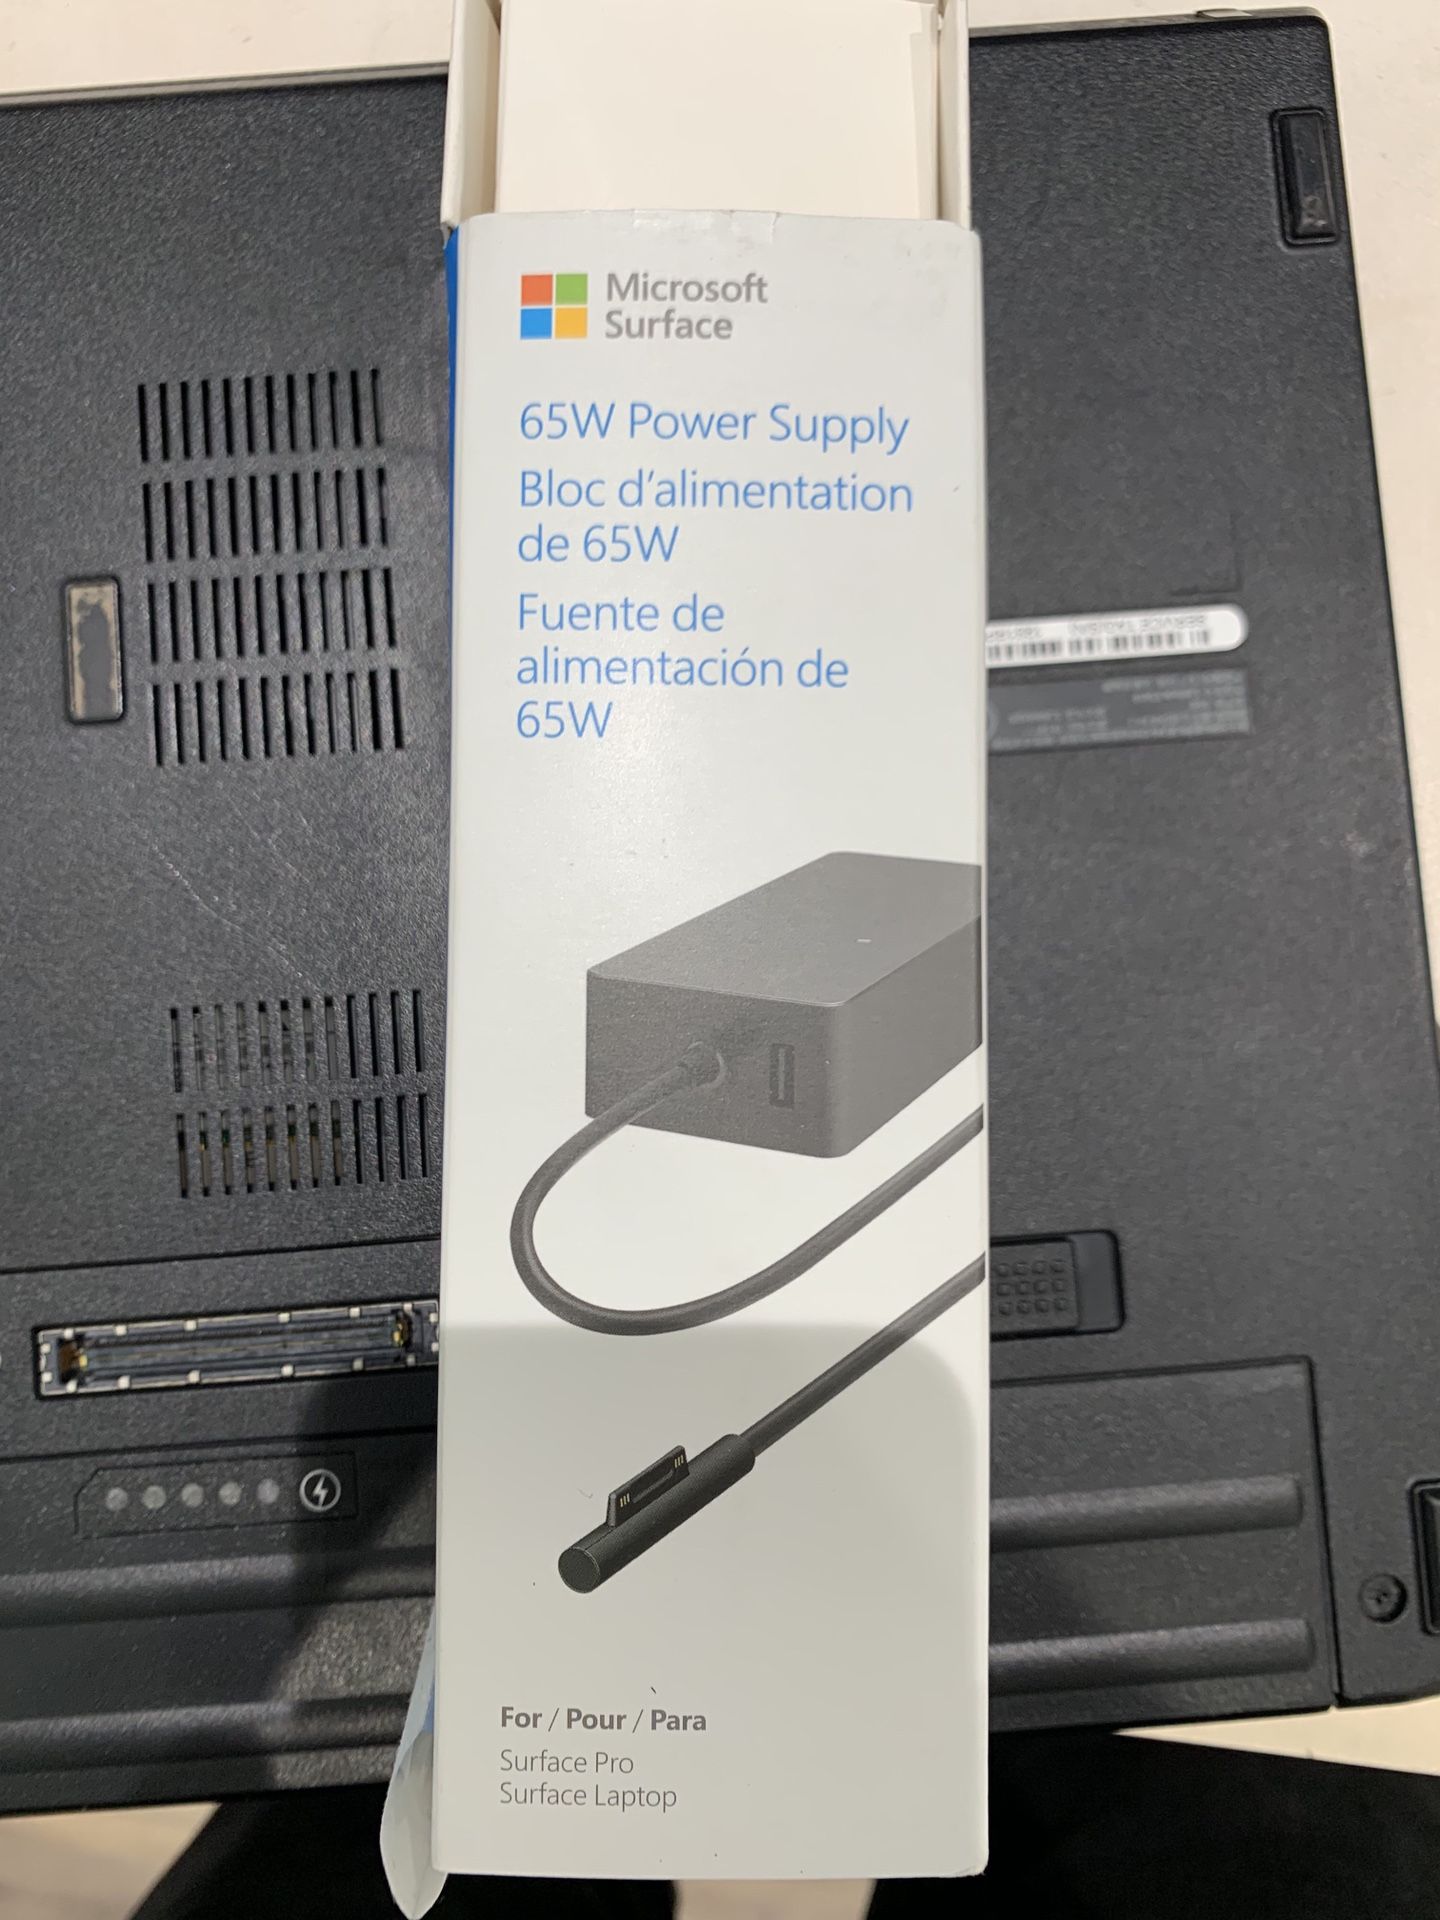 Microsoft Surface 65W Power Supply Charger